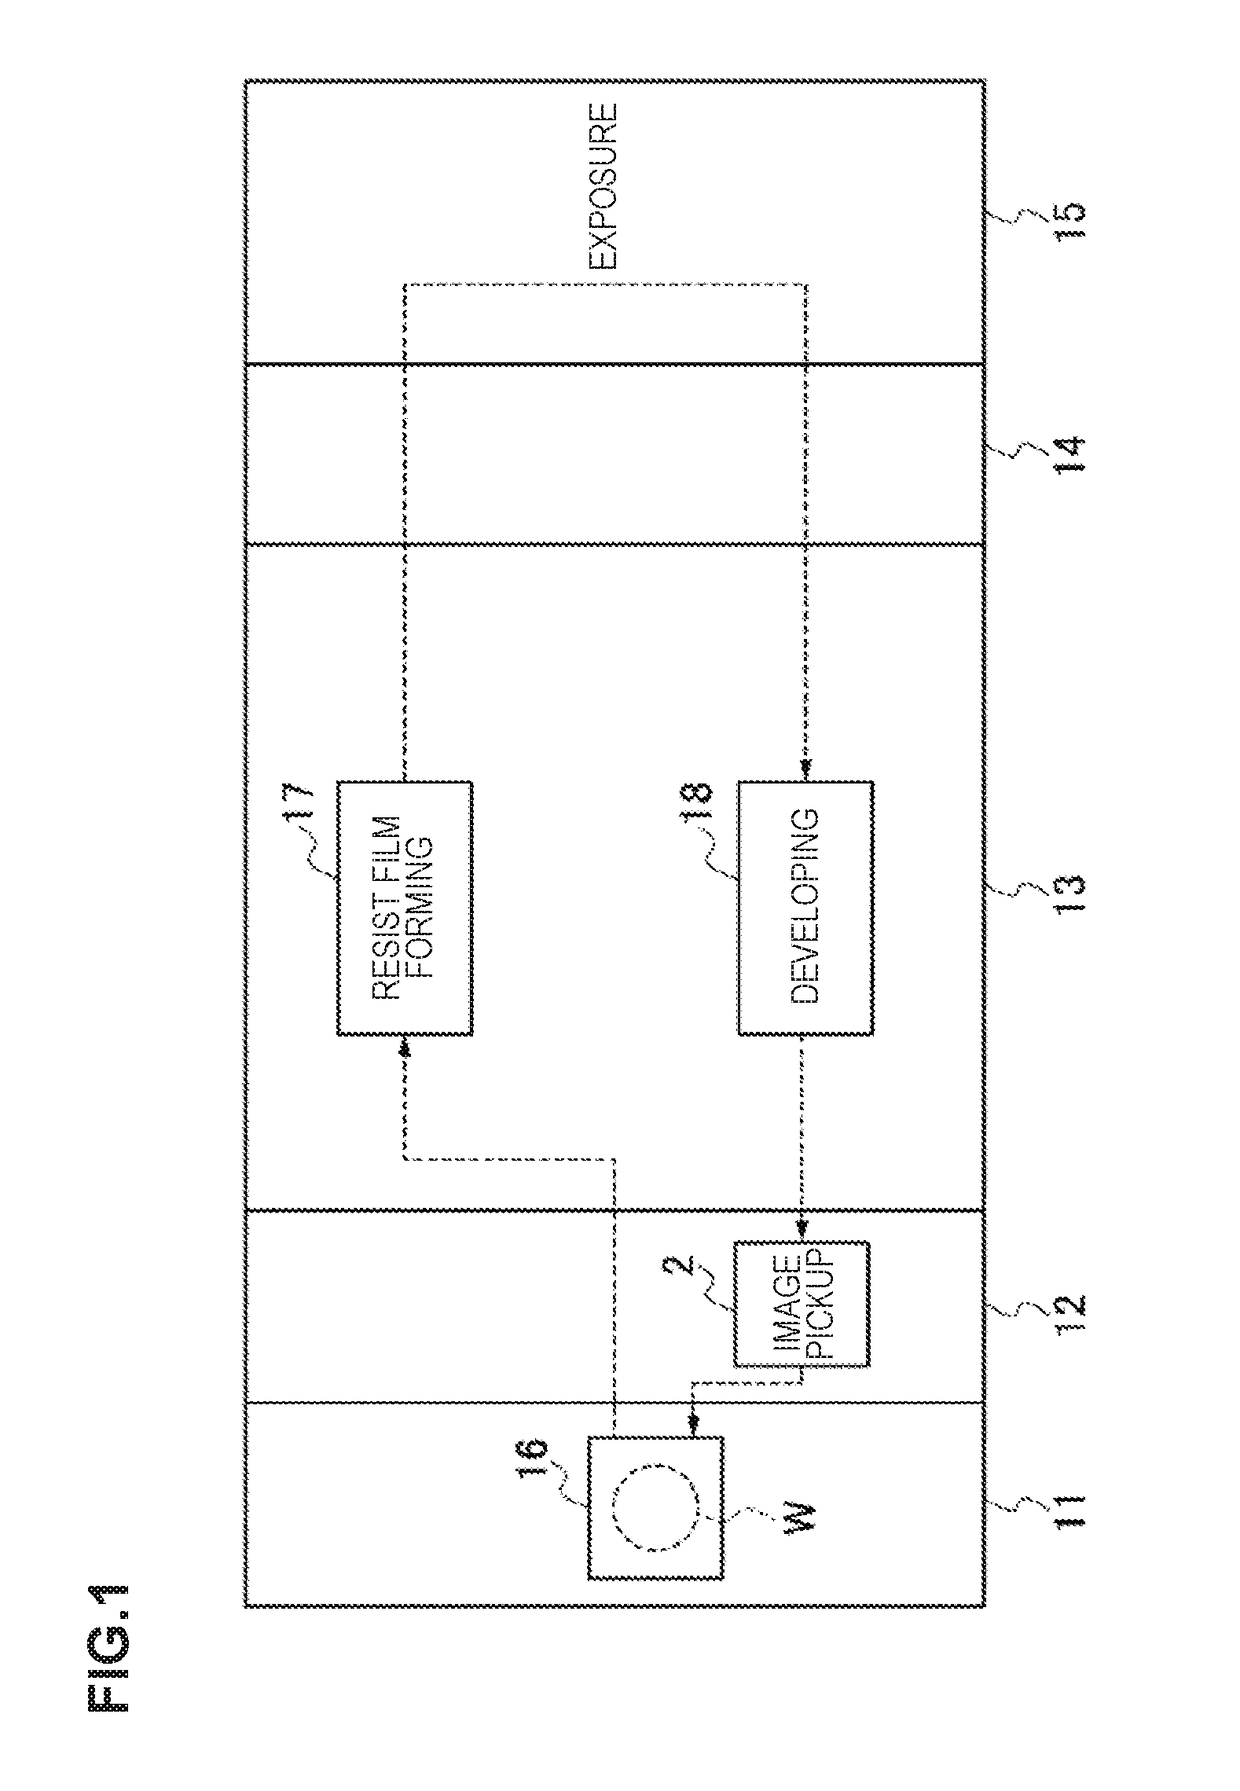 Substrate defect inspection apparatus, method of adjusting sensitivity parameter value for substrate defect inspection, and non-transitory storage medium